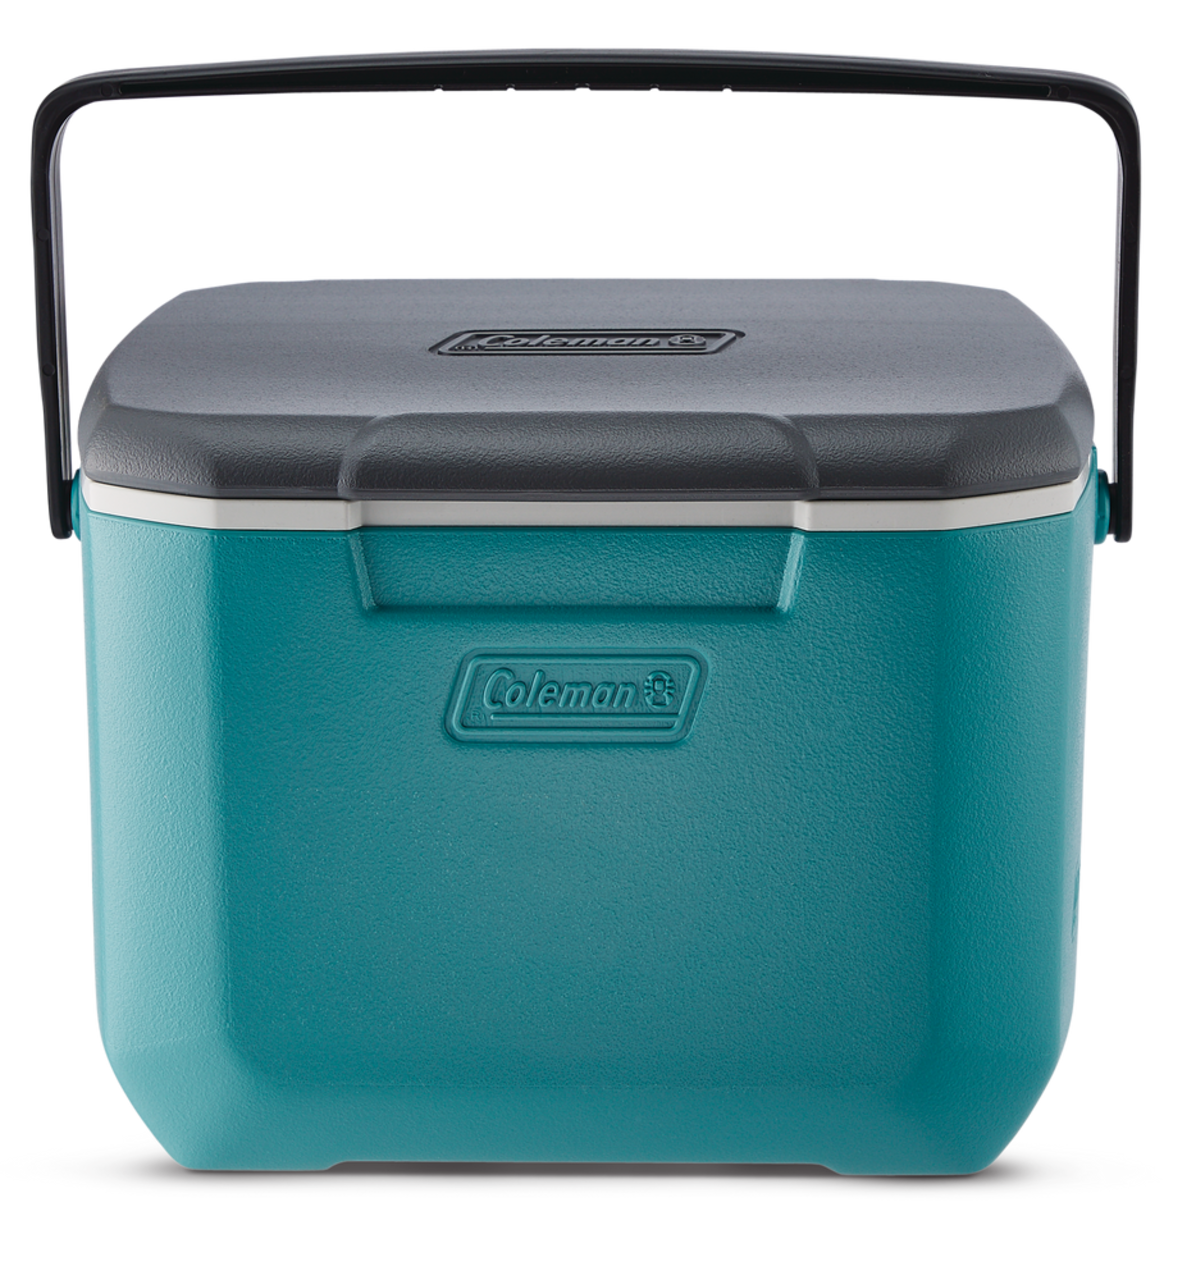 Health & Fitness - Outdoor Activities & Sports - Camping - Coleman 40-Quart  Powerchill Cooler - Online Shopping for Canadians